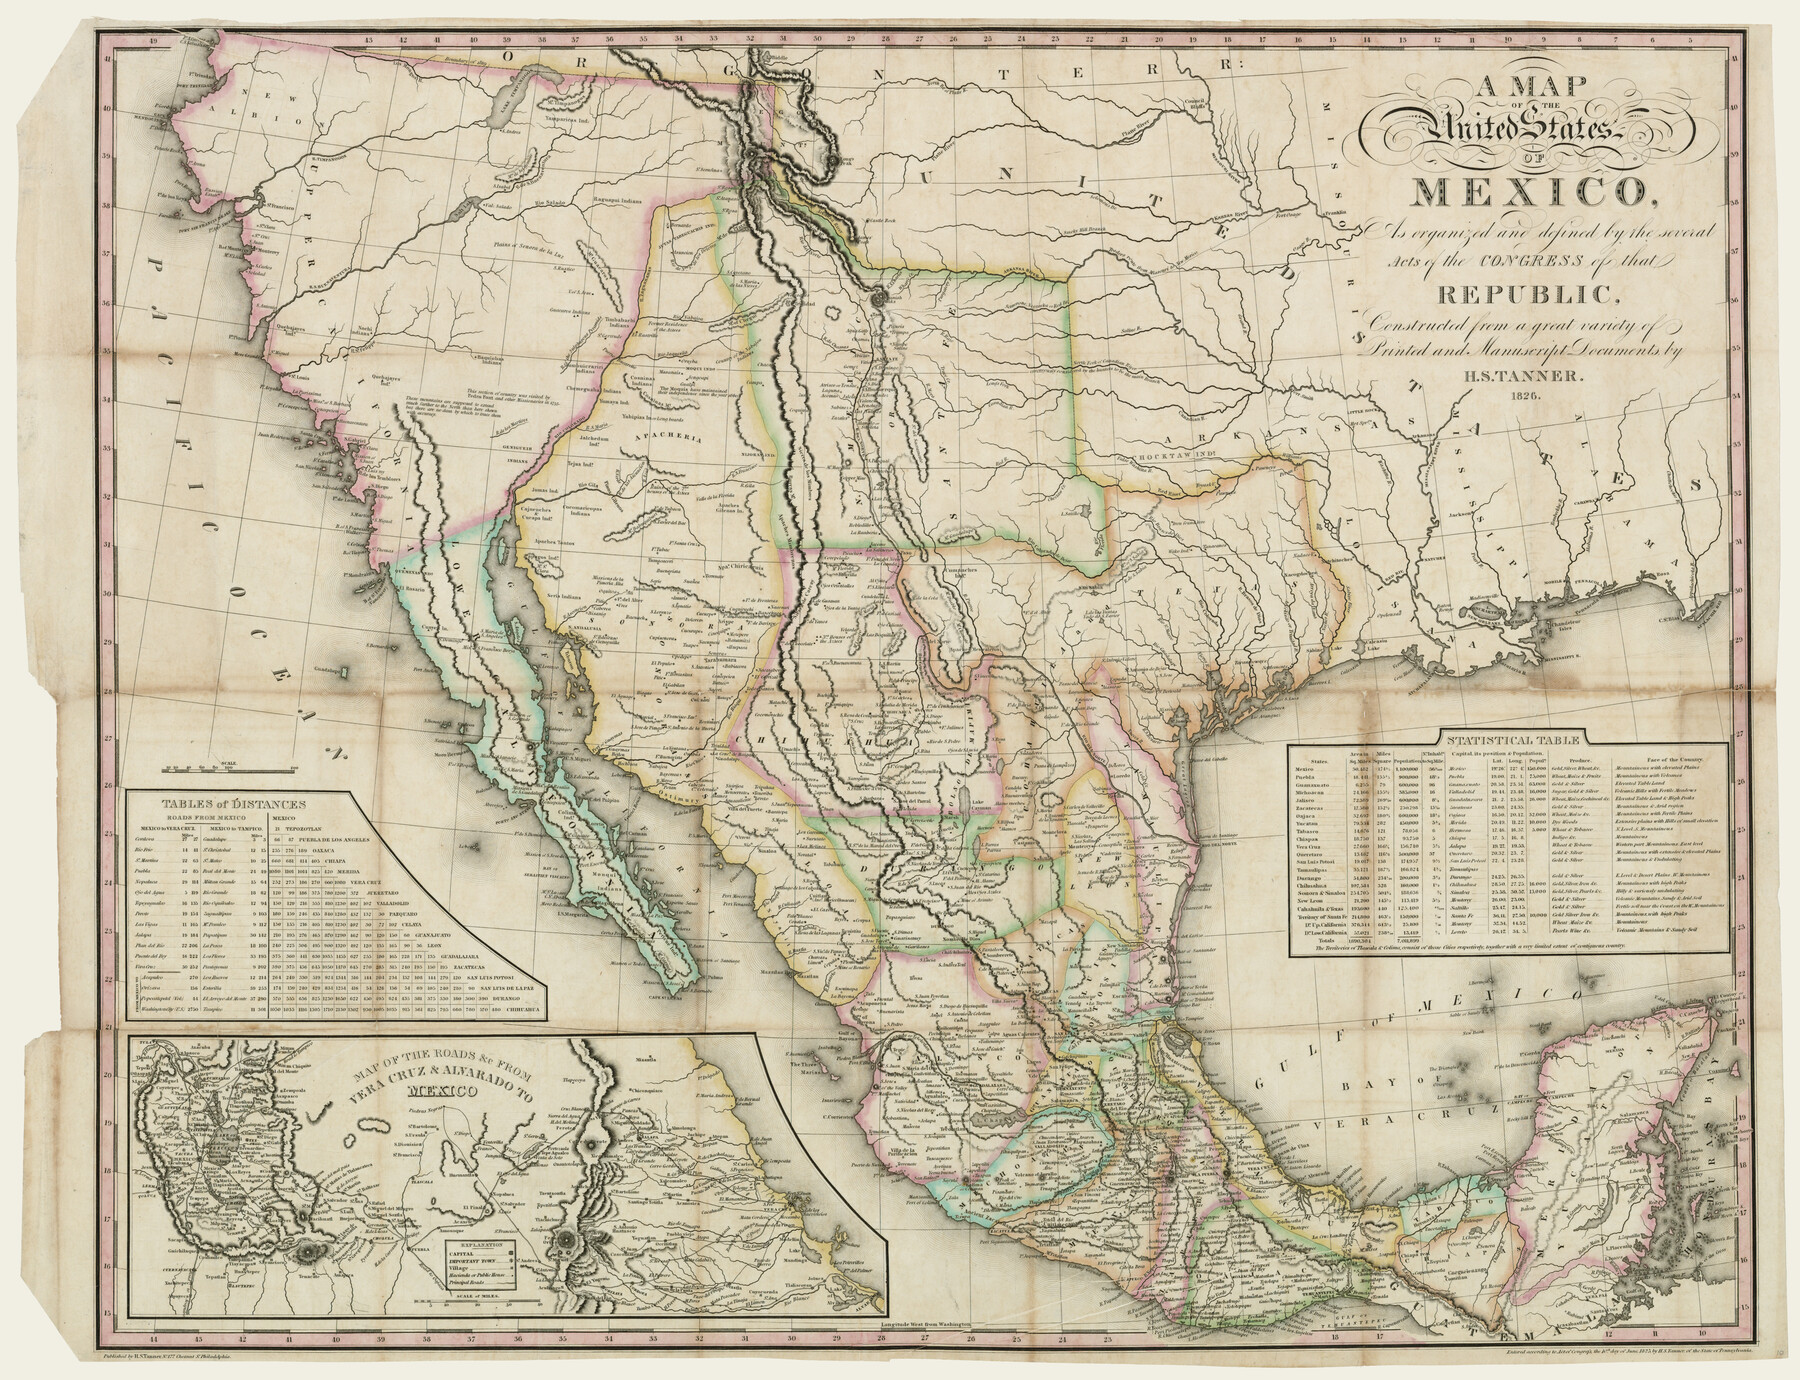 93939, A Map of the United States of Mexico as organized and defined by the several Acts of the Congress of that Republic, Rees-Jones Digital Map Collection